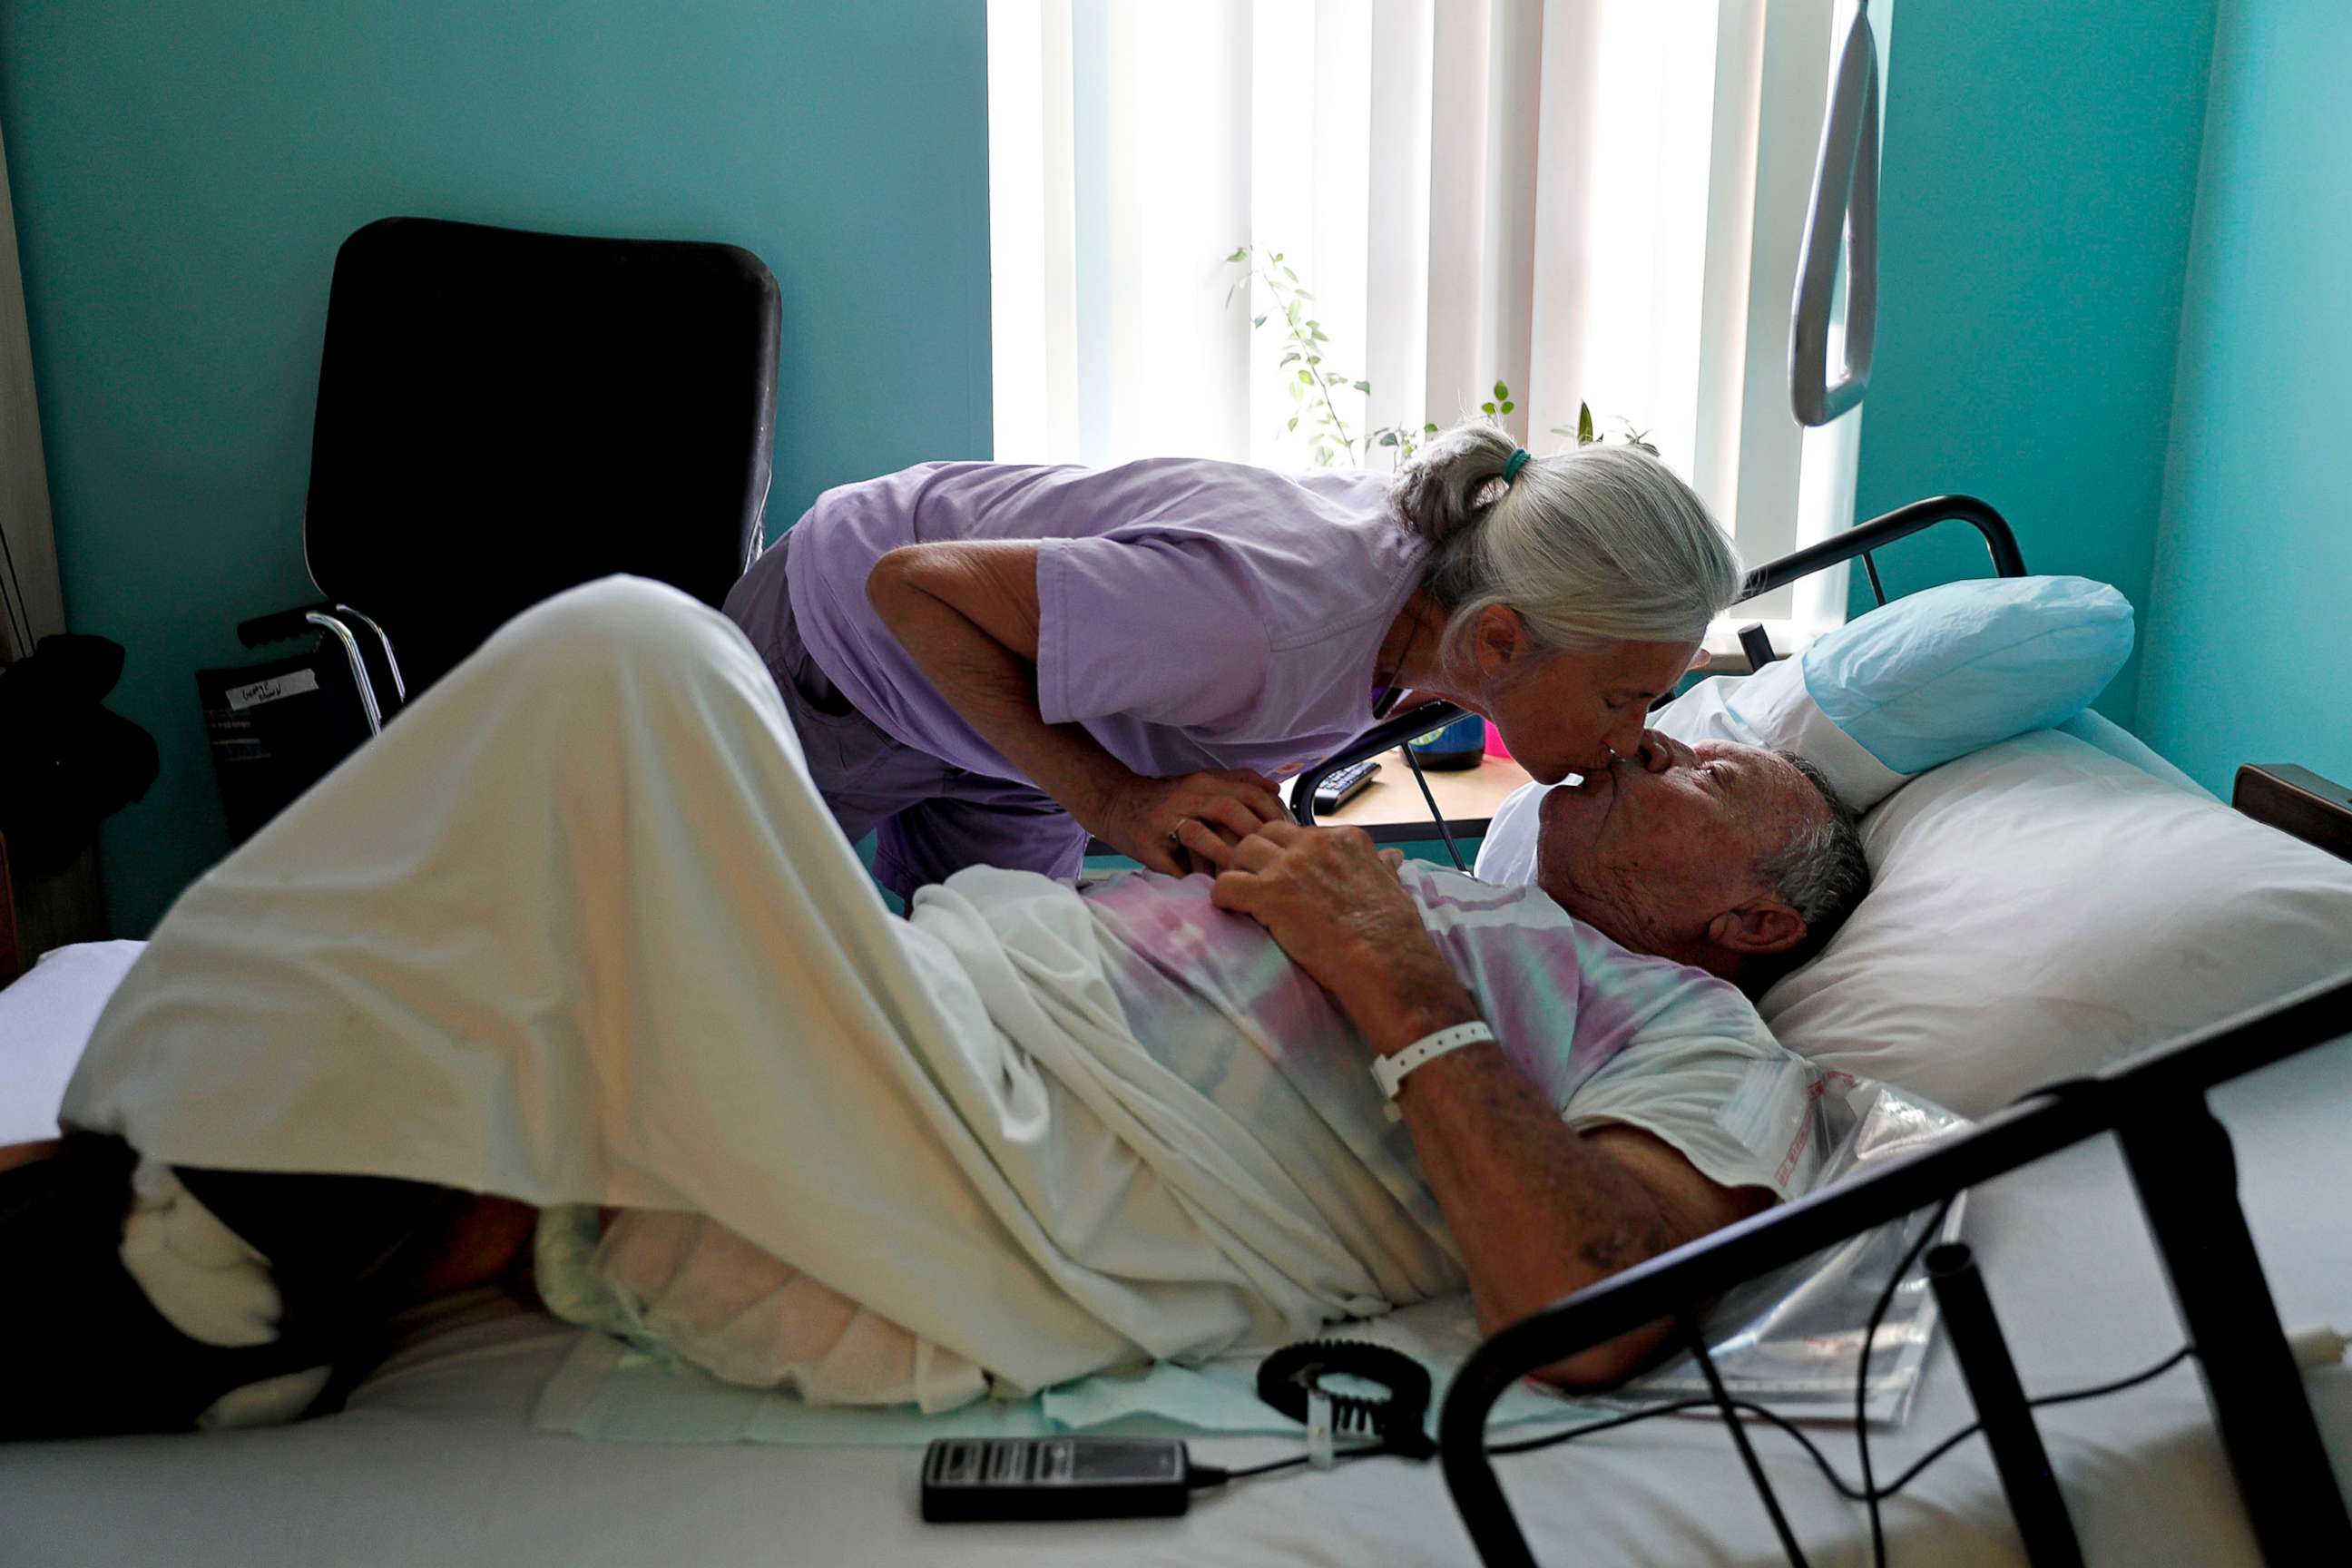 PHOTO: Marge Brown, 65, says goodbye to her father, George Brown, 90, before he is evacuated from a healthcare home in Morehead City, N.C., Sept. 12, 2018, as Hurricane Florence approaches the east coast.